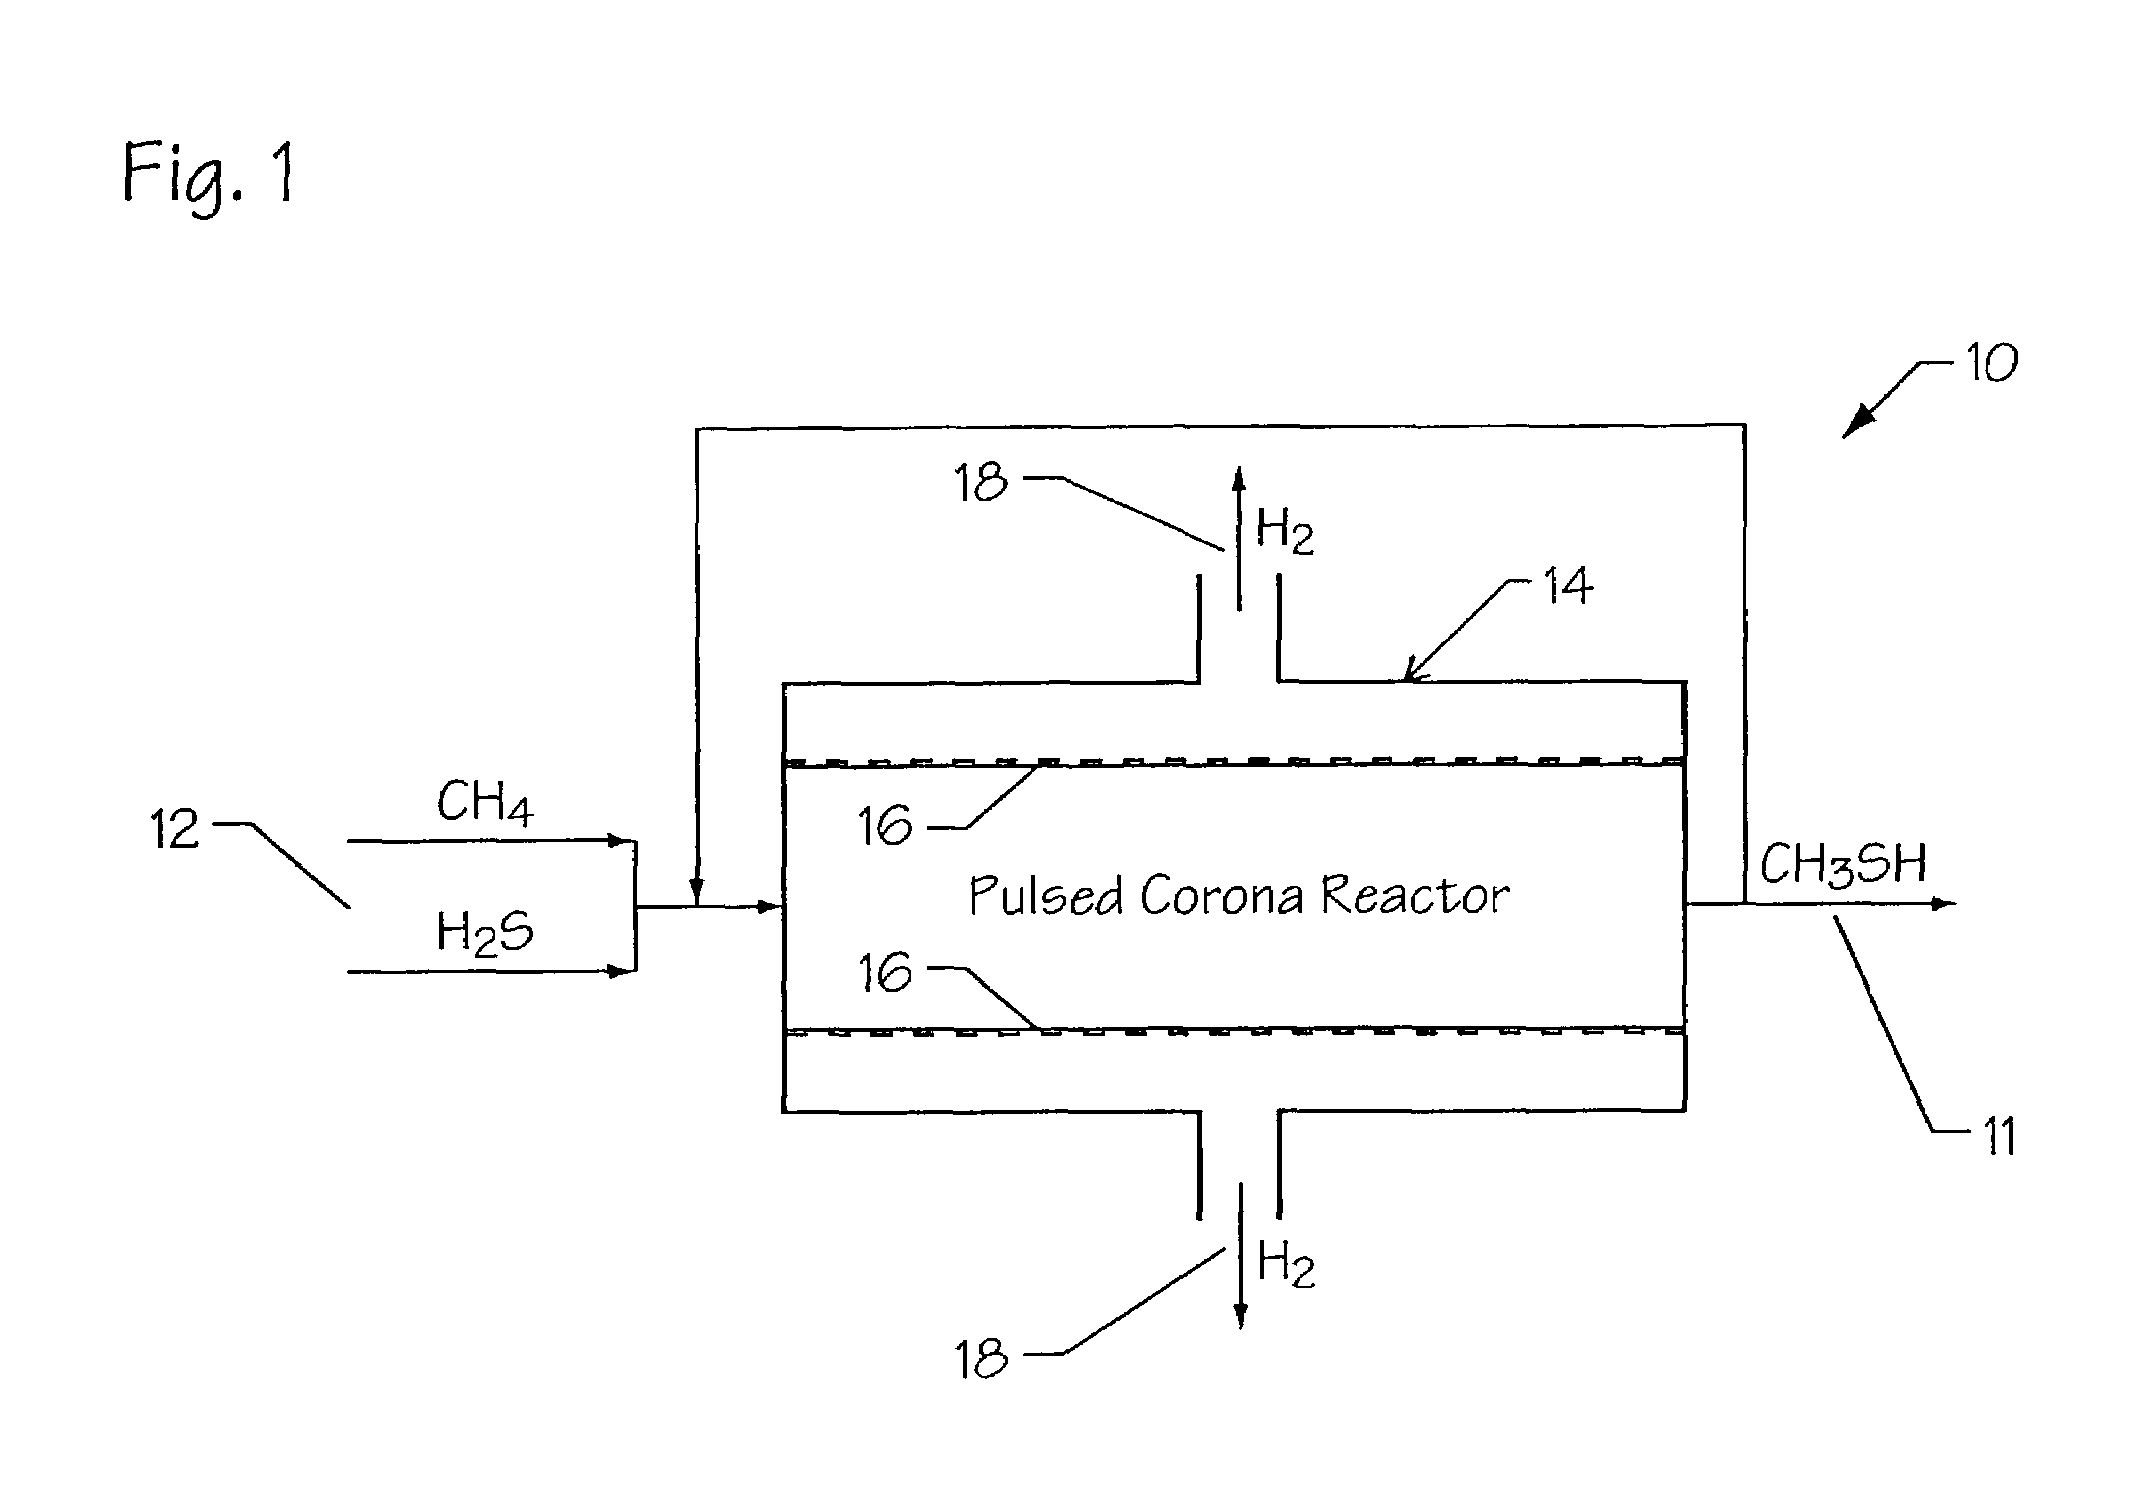 Apparatus and method for production of methanethiol